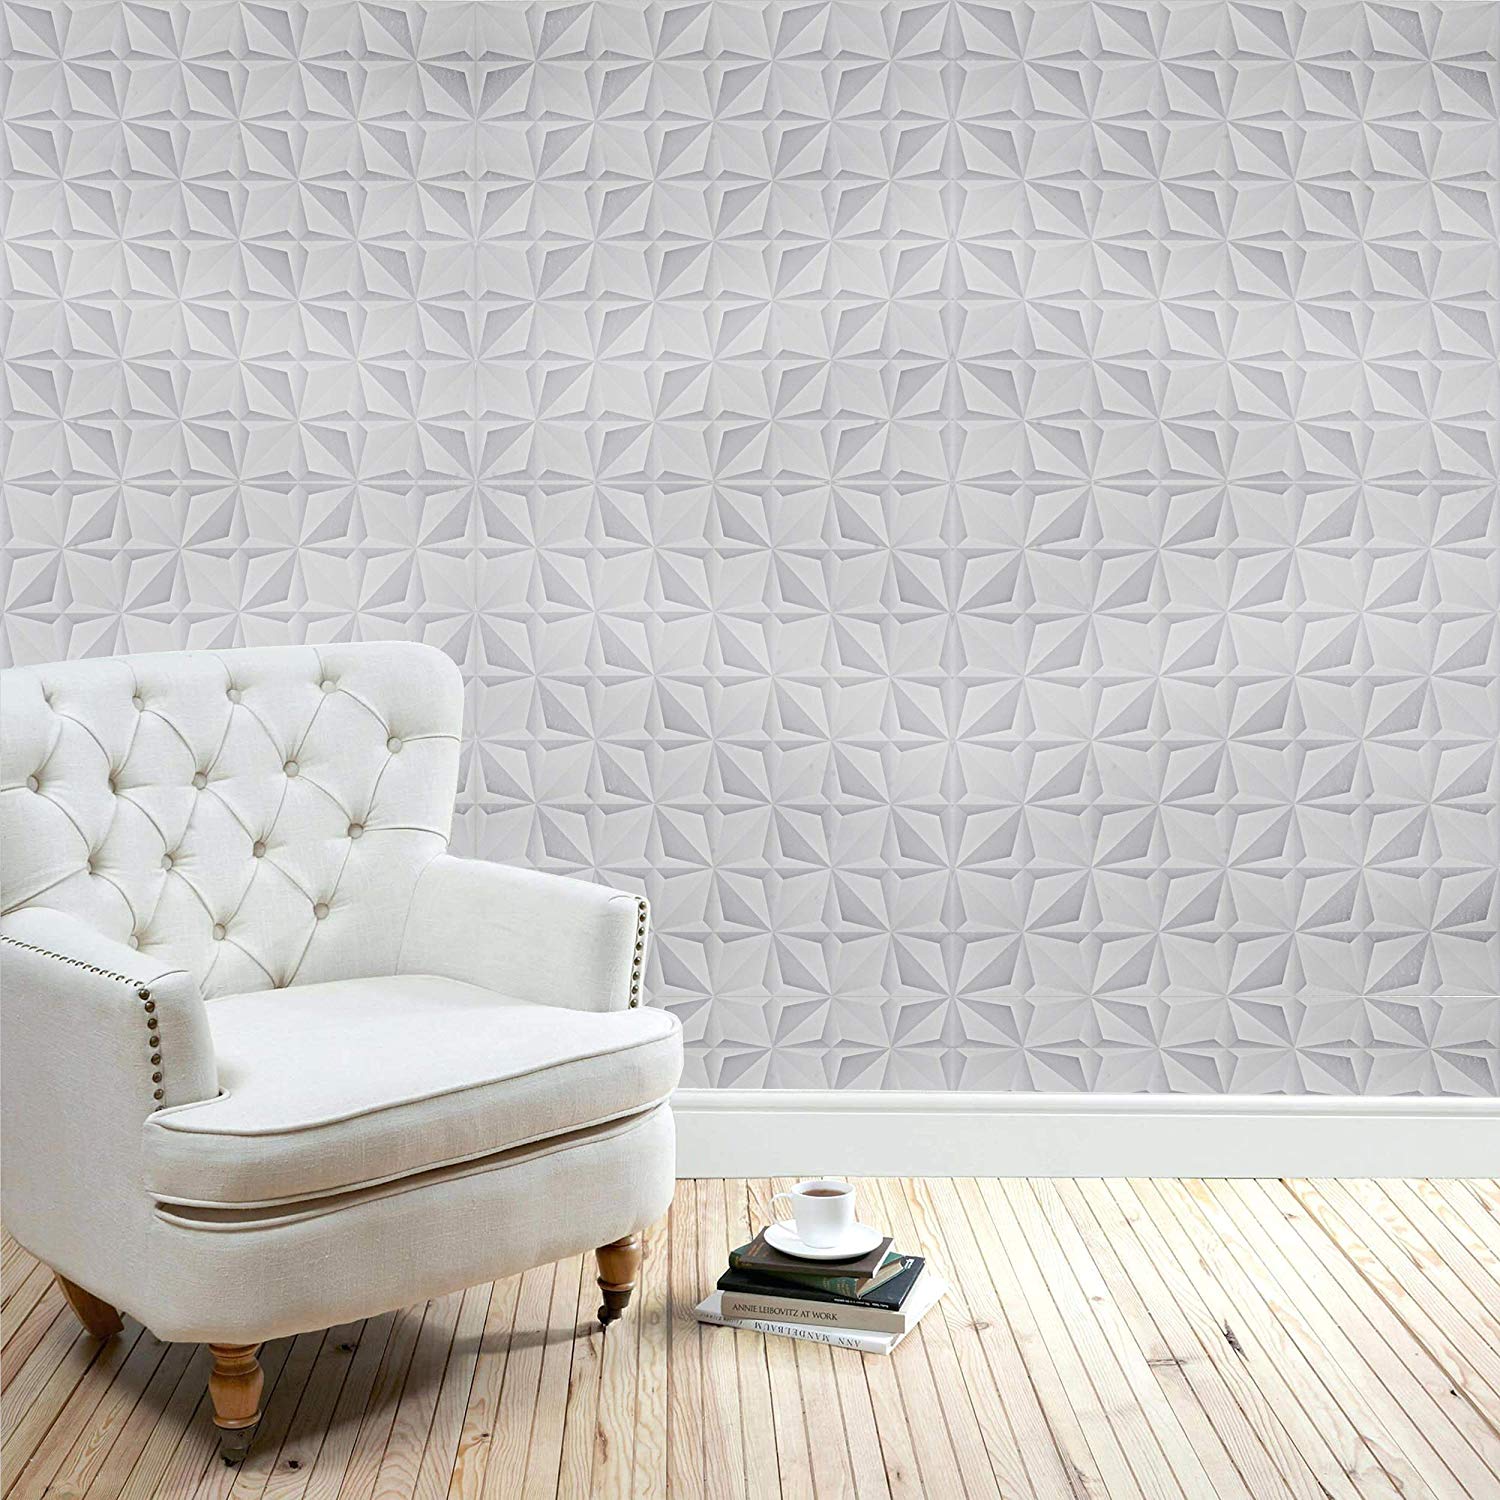 Wallpaper Wp525 Imported Vinyl Coated Washable Cover